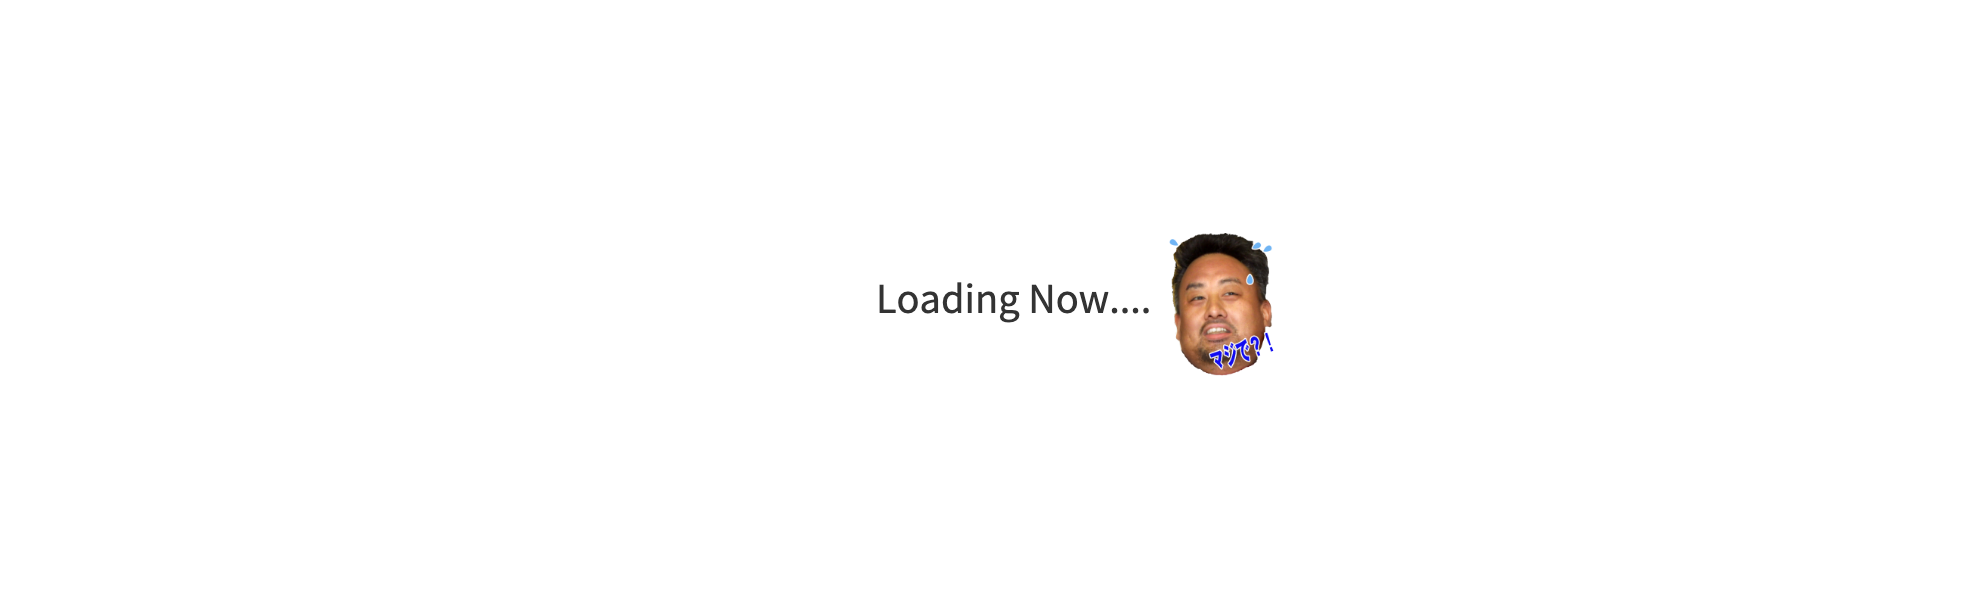 Now loading...